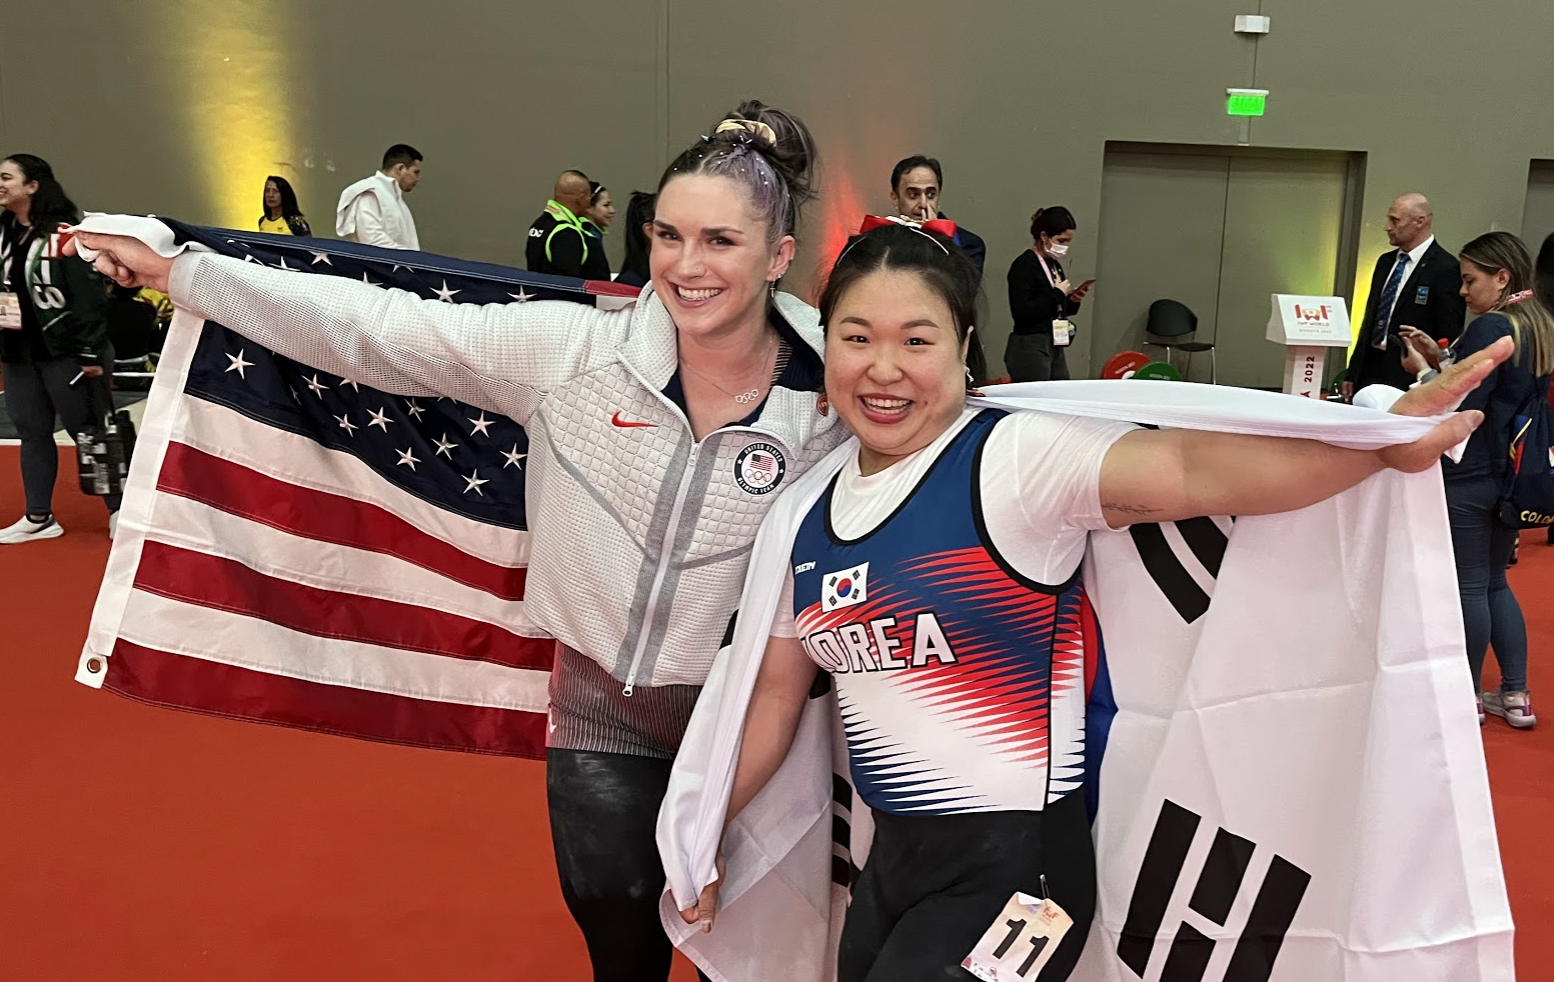 Mattie Rogers from the United States and Kim Suhyeon from South Korea won medals in the 76kg class ©ITG